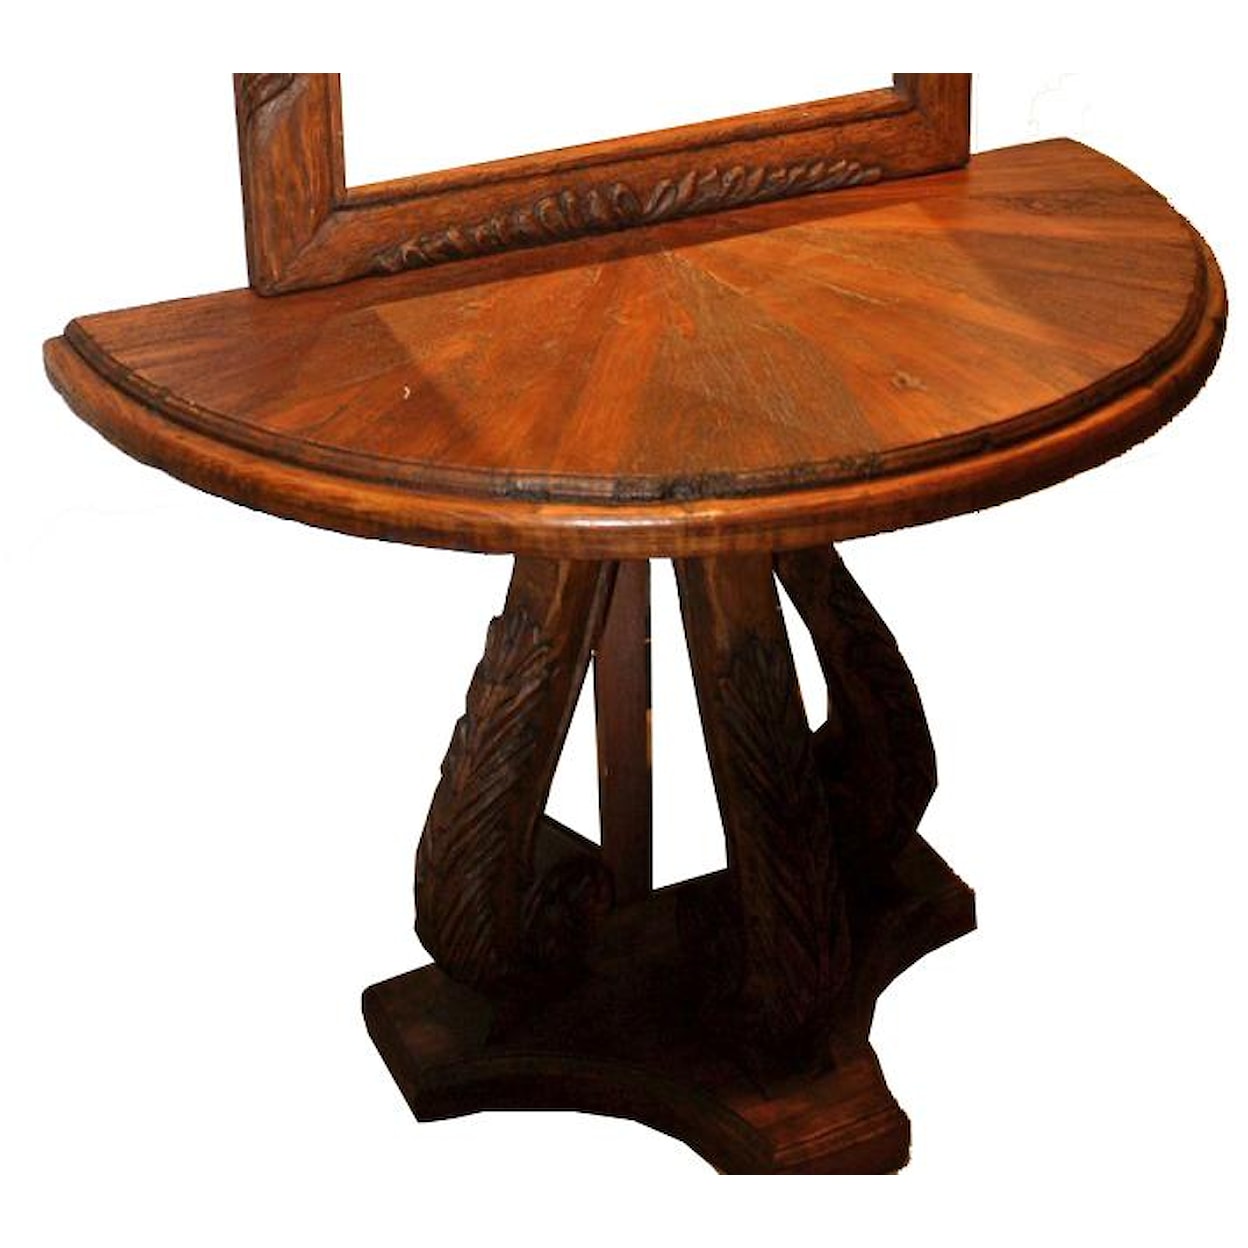 Furniture Source International Occasional Tables Demilune Console